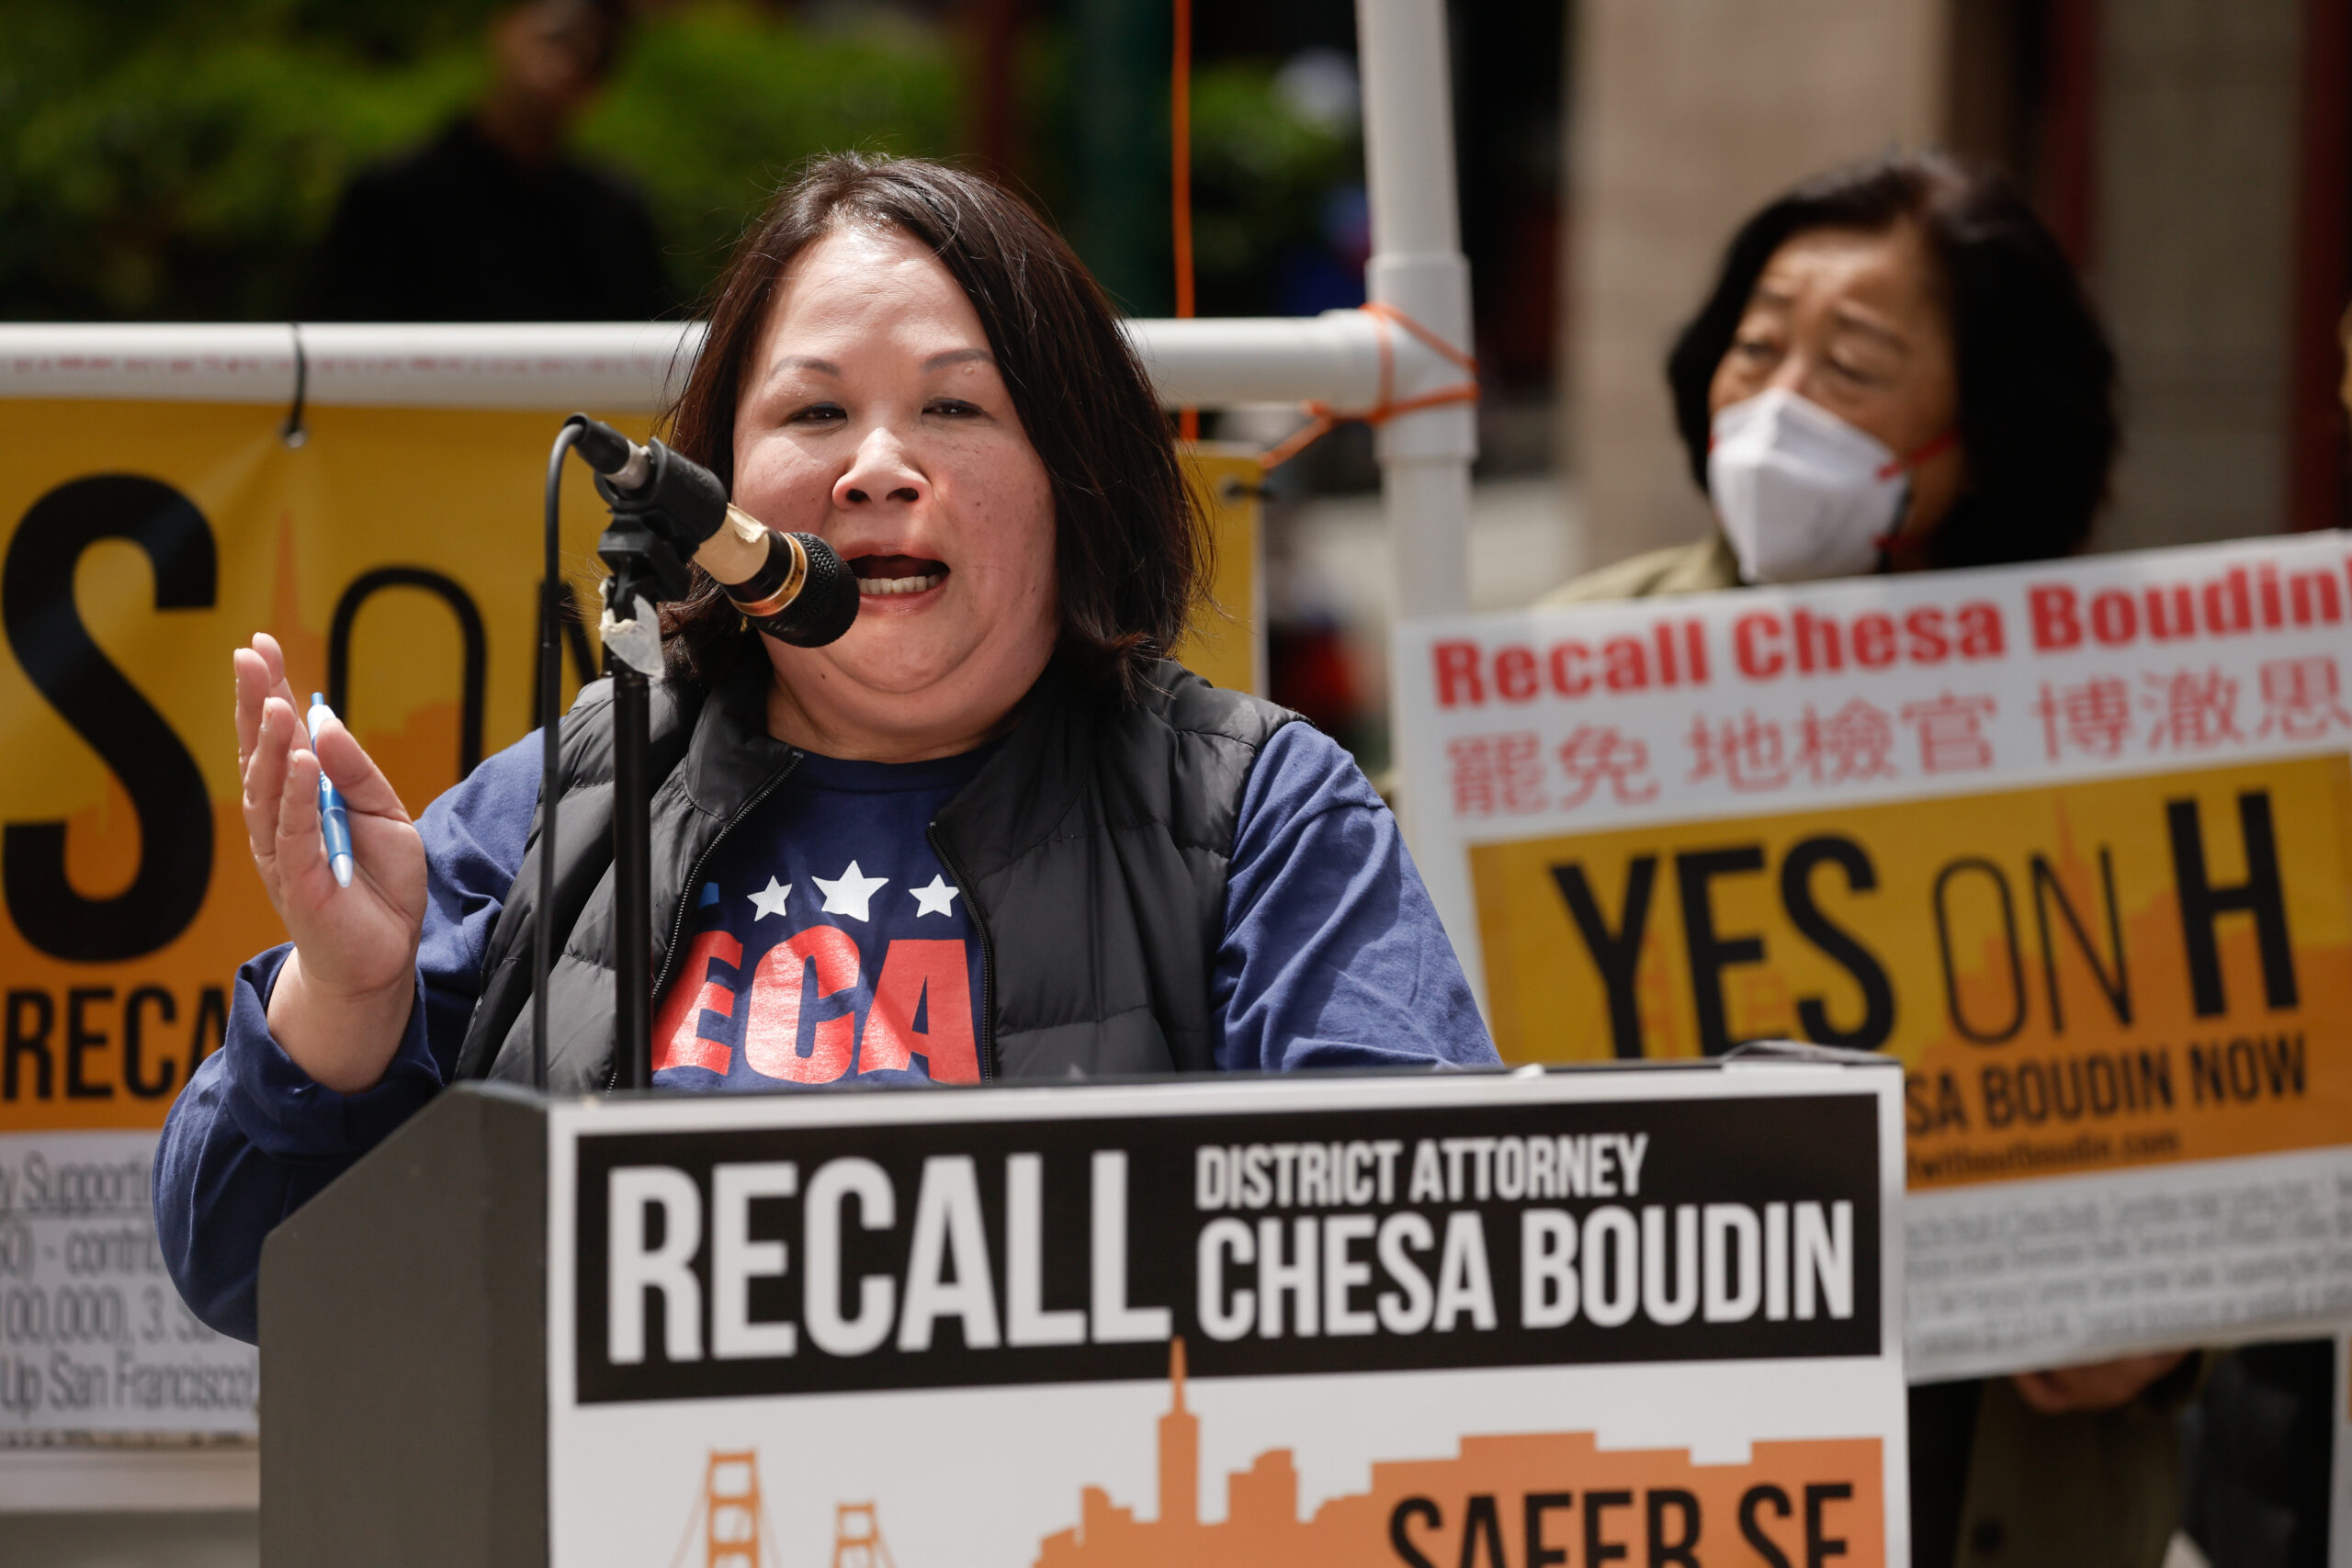 Mary Jung speaks into a microphone at a podium with signs urging to recall District Attorney Chesa Boudin.